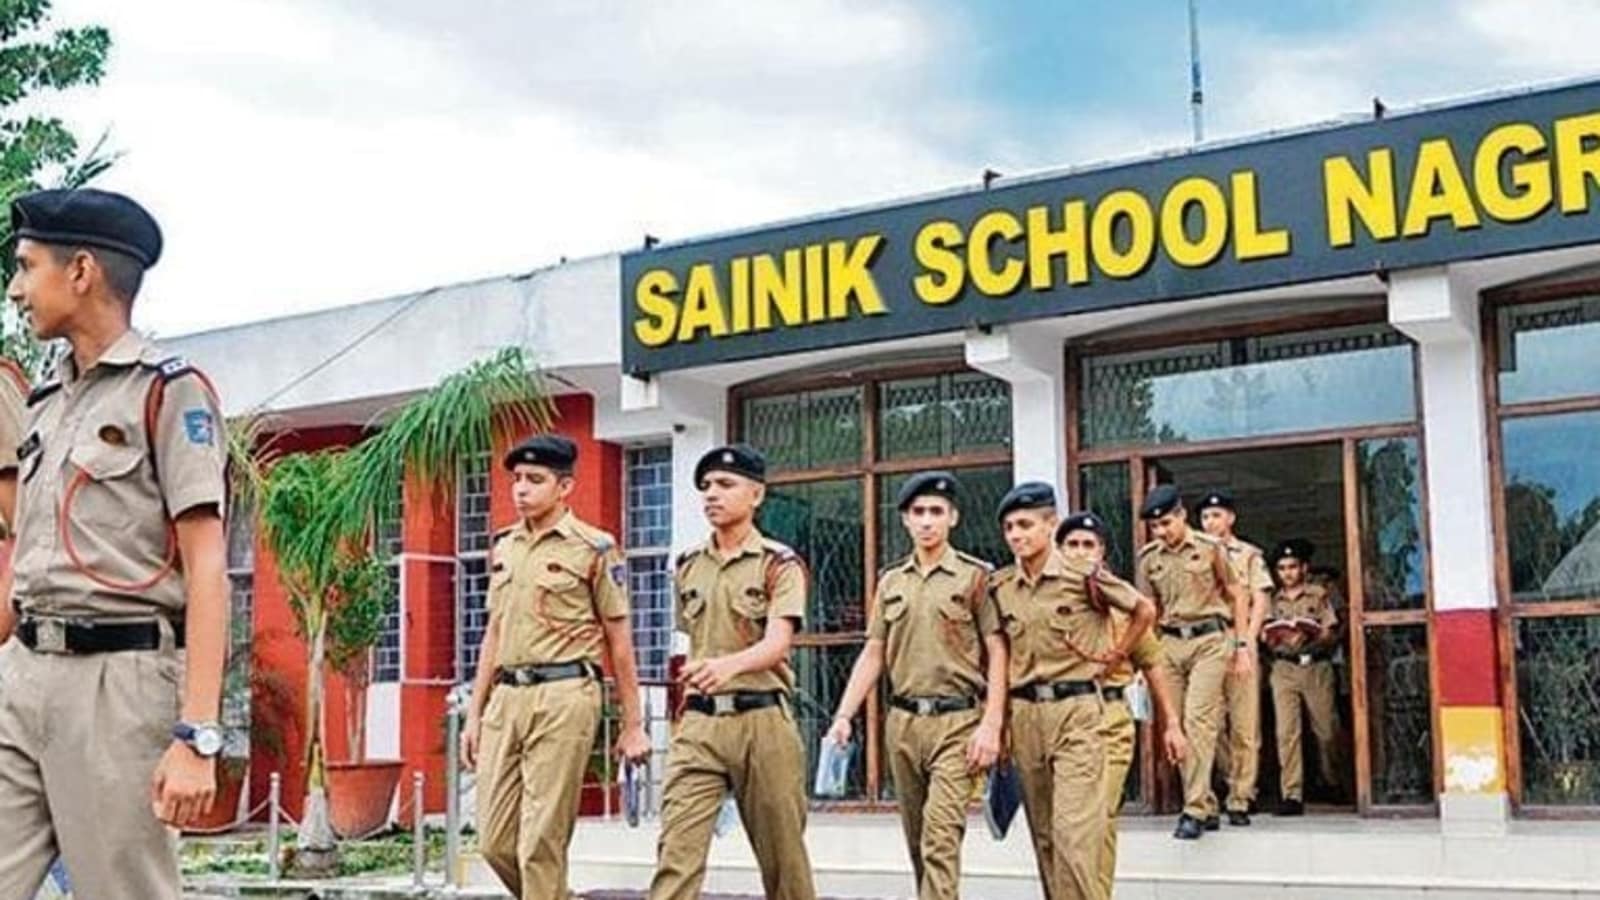 School Girl Bus Me Jbar Dsti Xxx Video - Sainik Schools now open for girls as well: All you need to know | Latest  News India - Hindustan Times